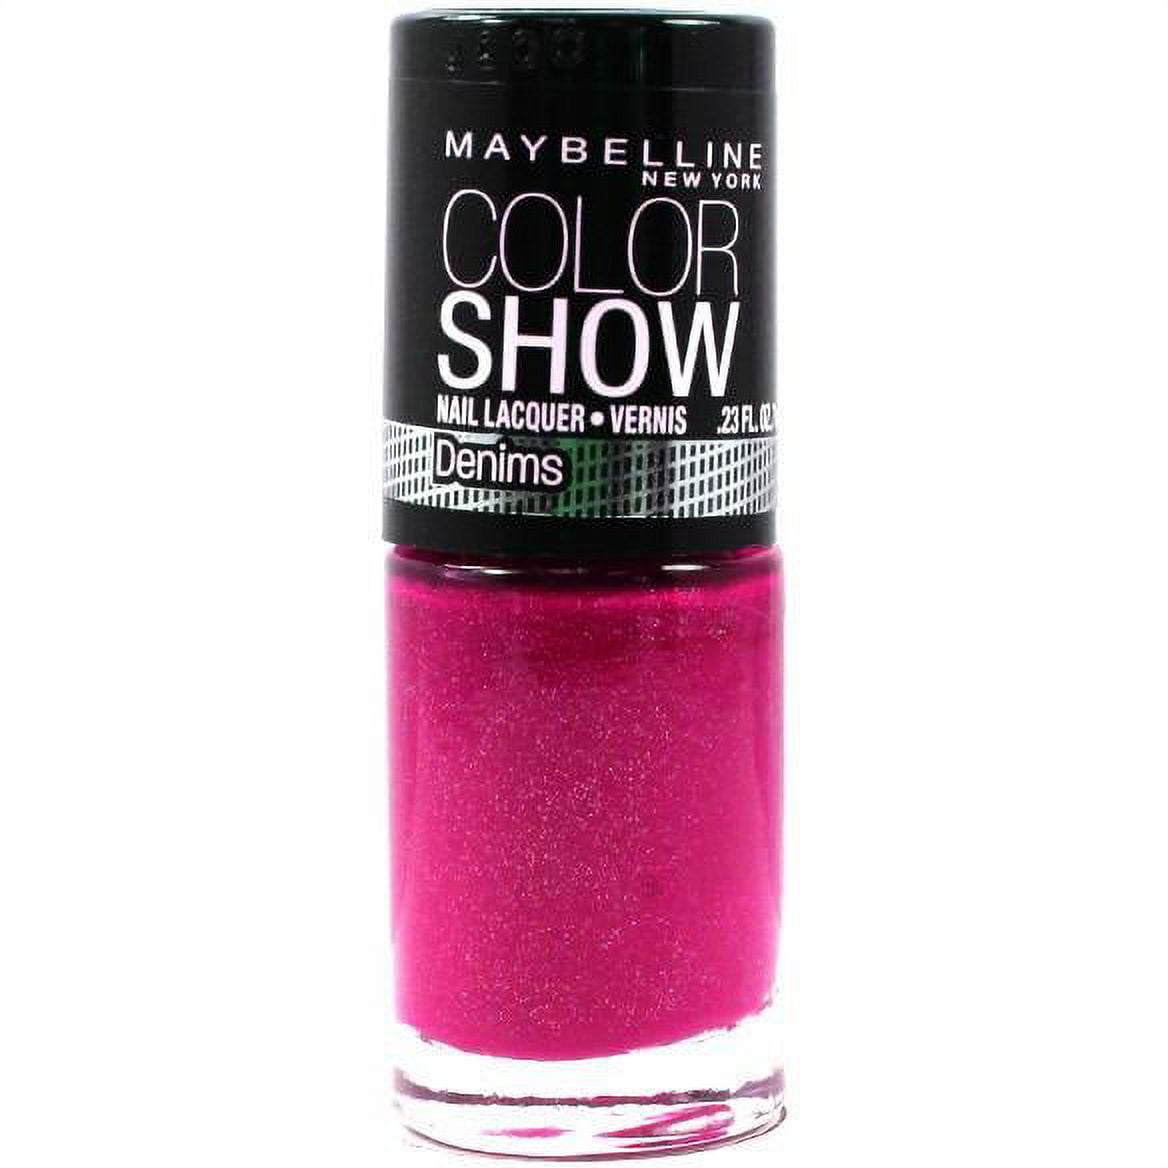 Maybelline Color Show 60 Seconds Nail Polish 353 Red for sale online | eBay